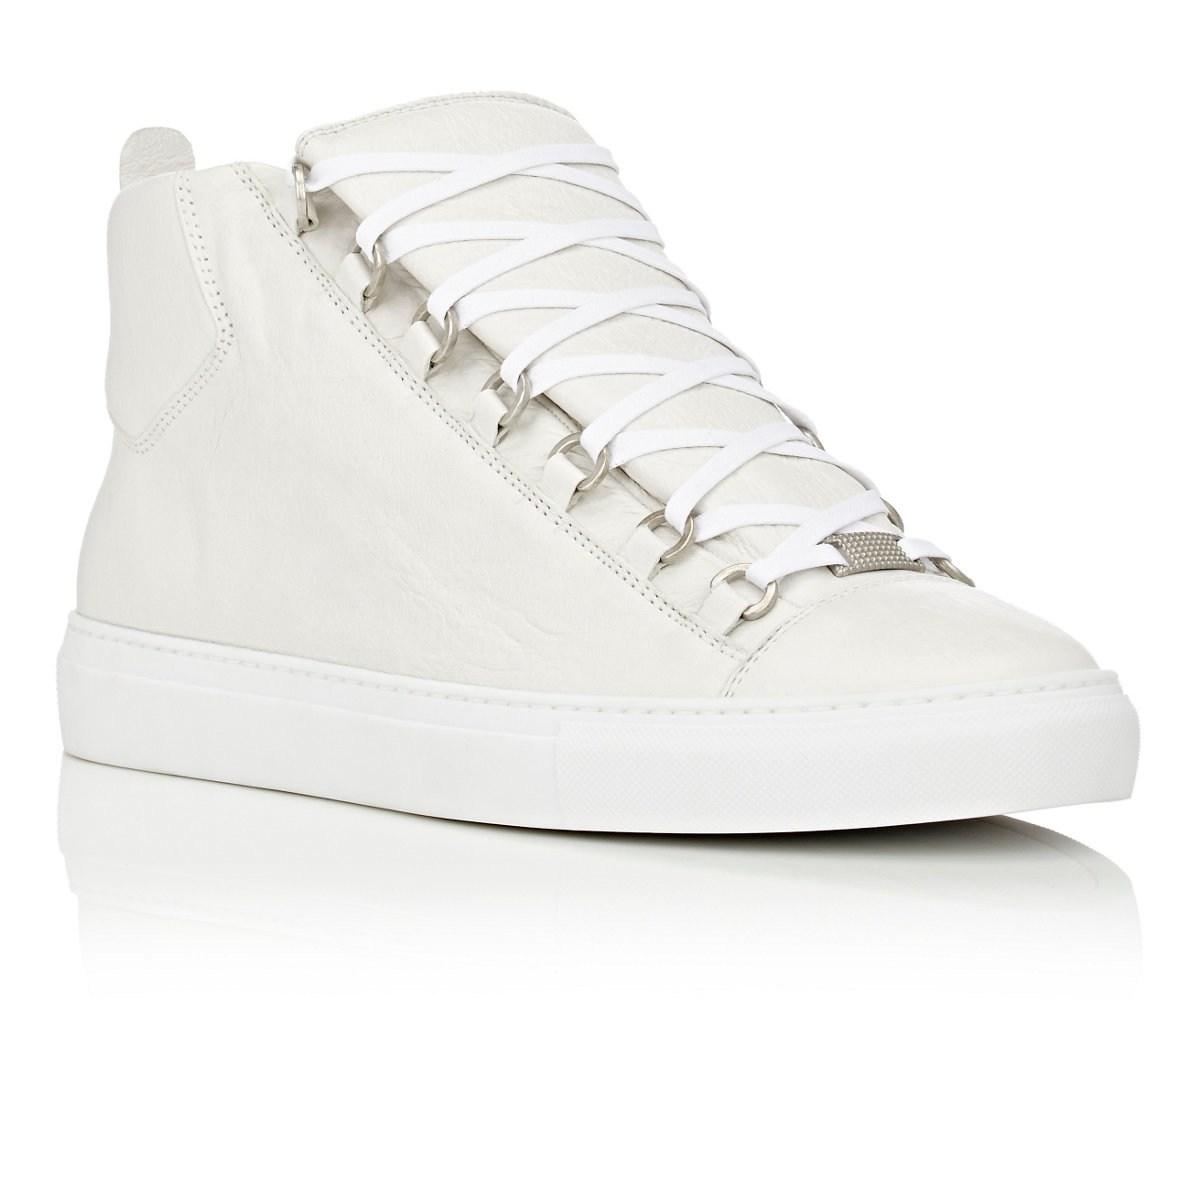 Balenciaga Arena Leather Sneakers in White for Men - Lyst